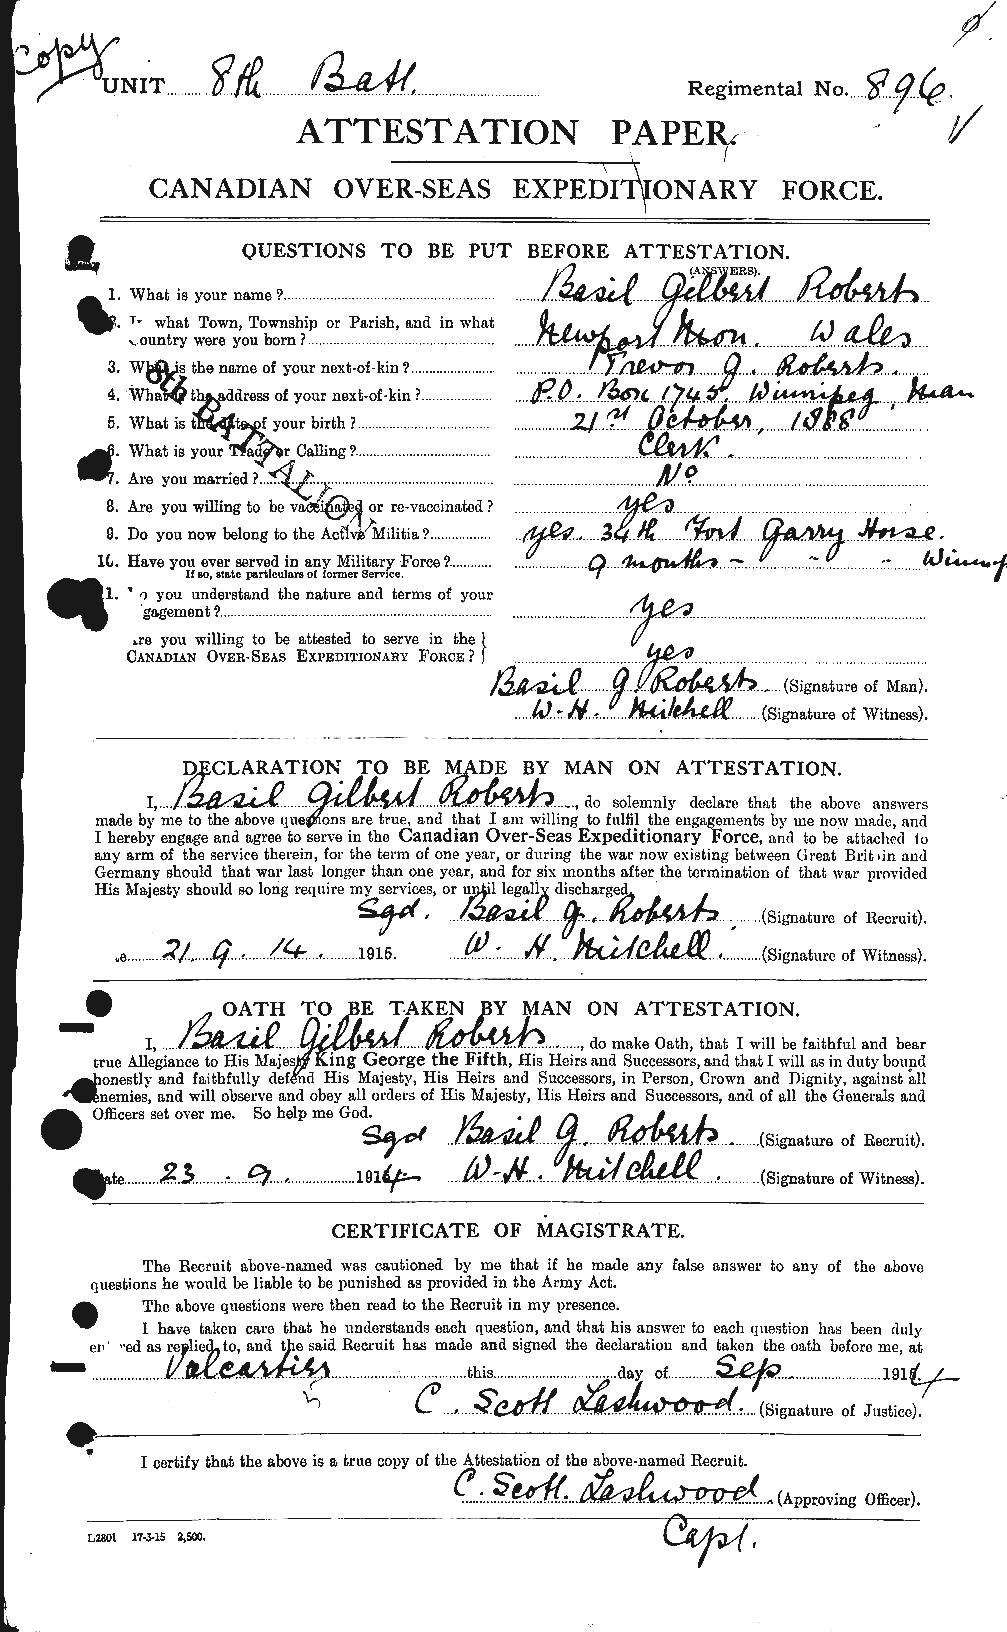 Personnel Records of the First World War - CEF 606268a